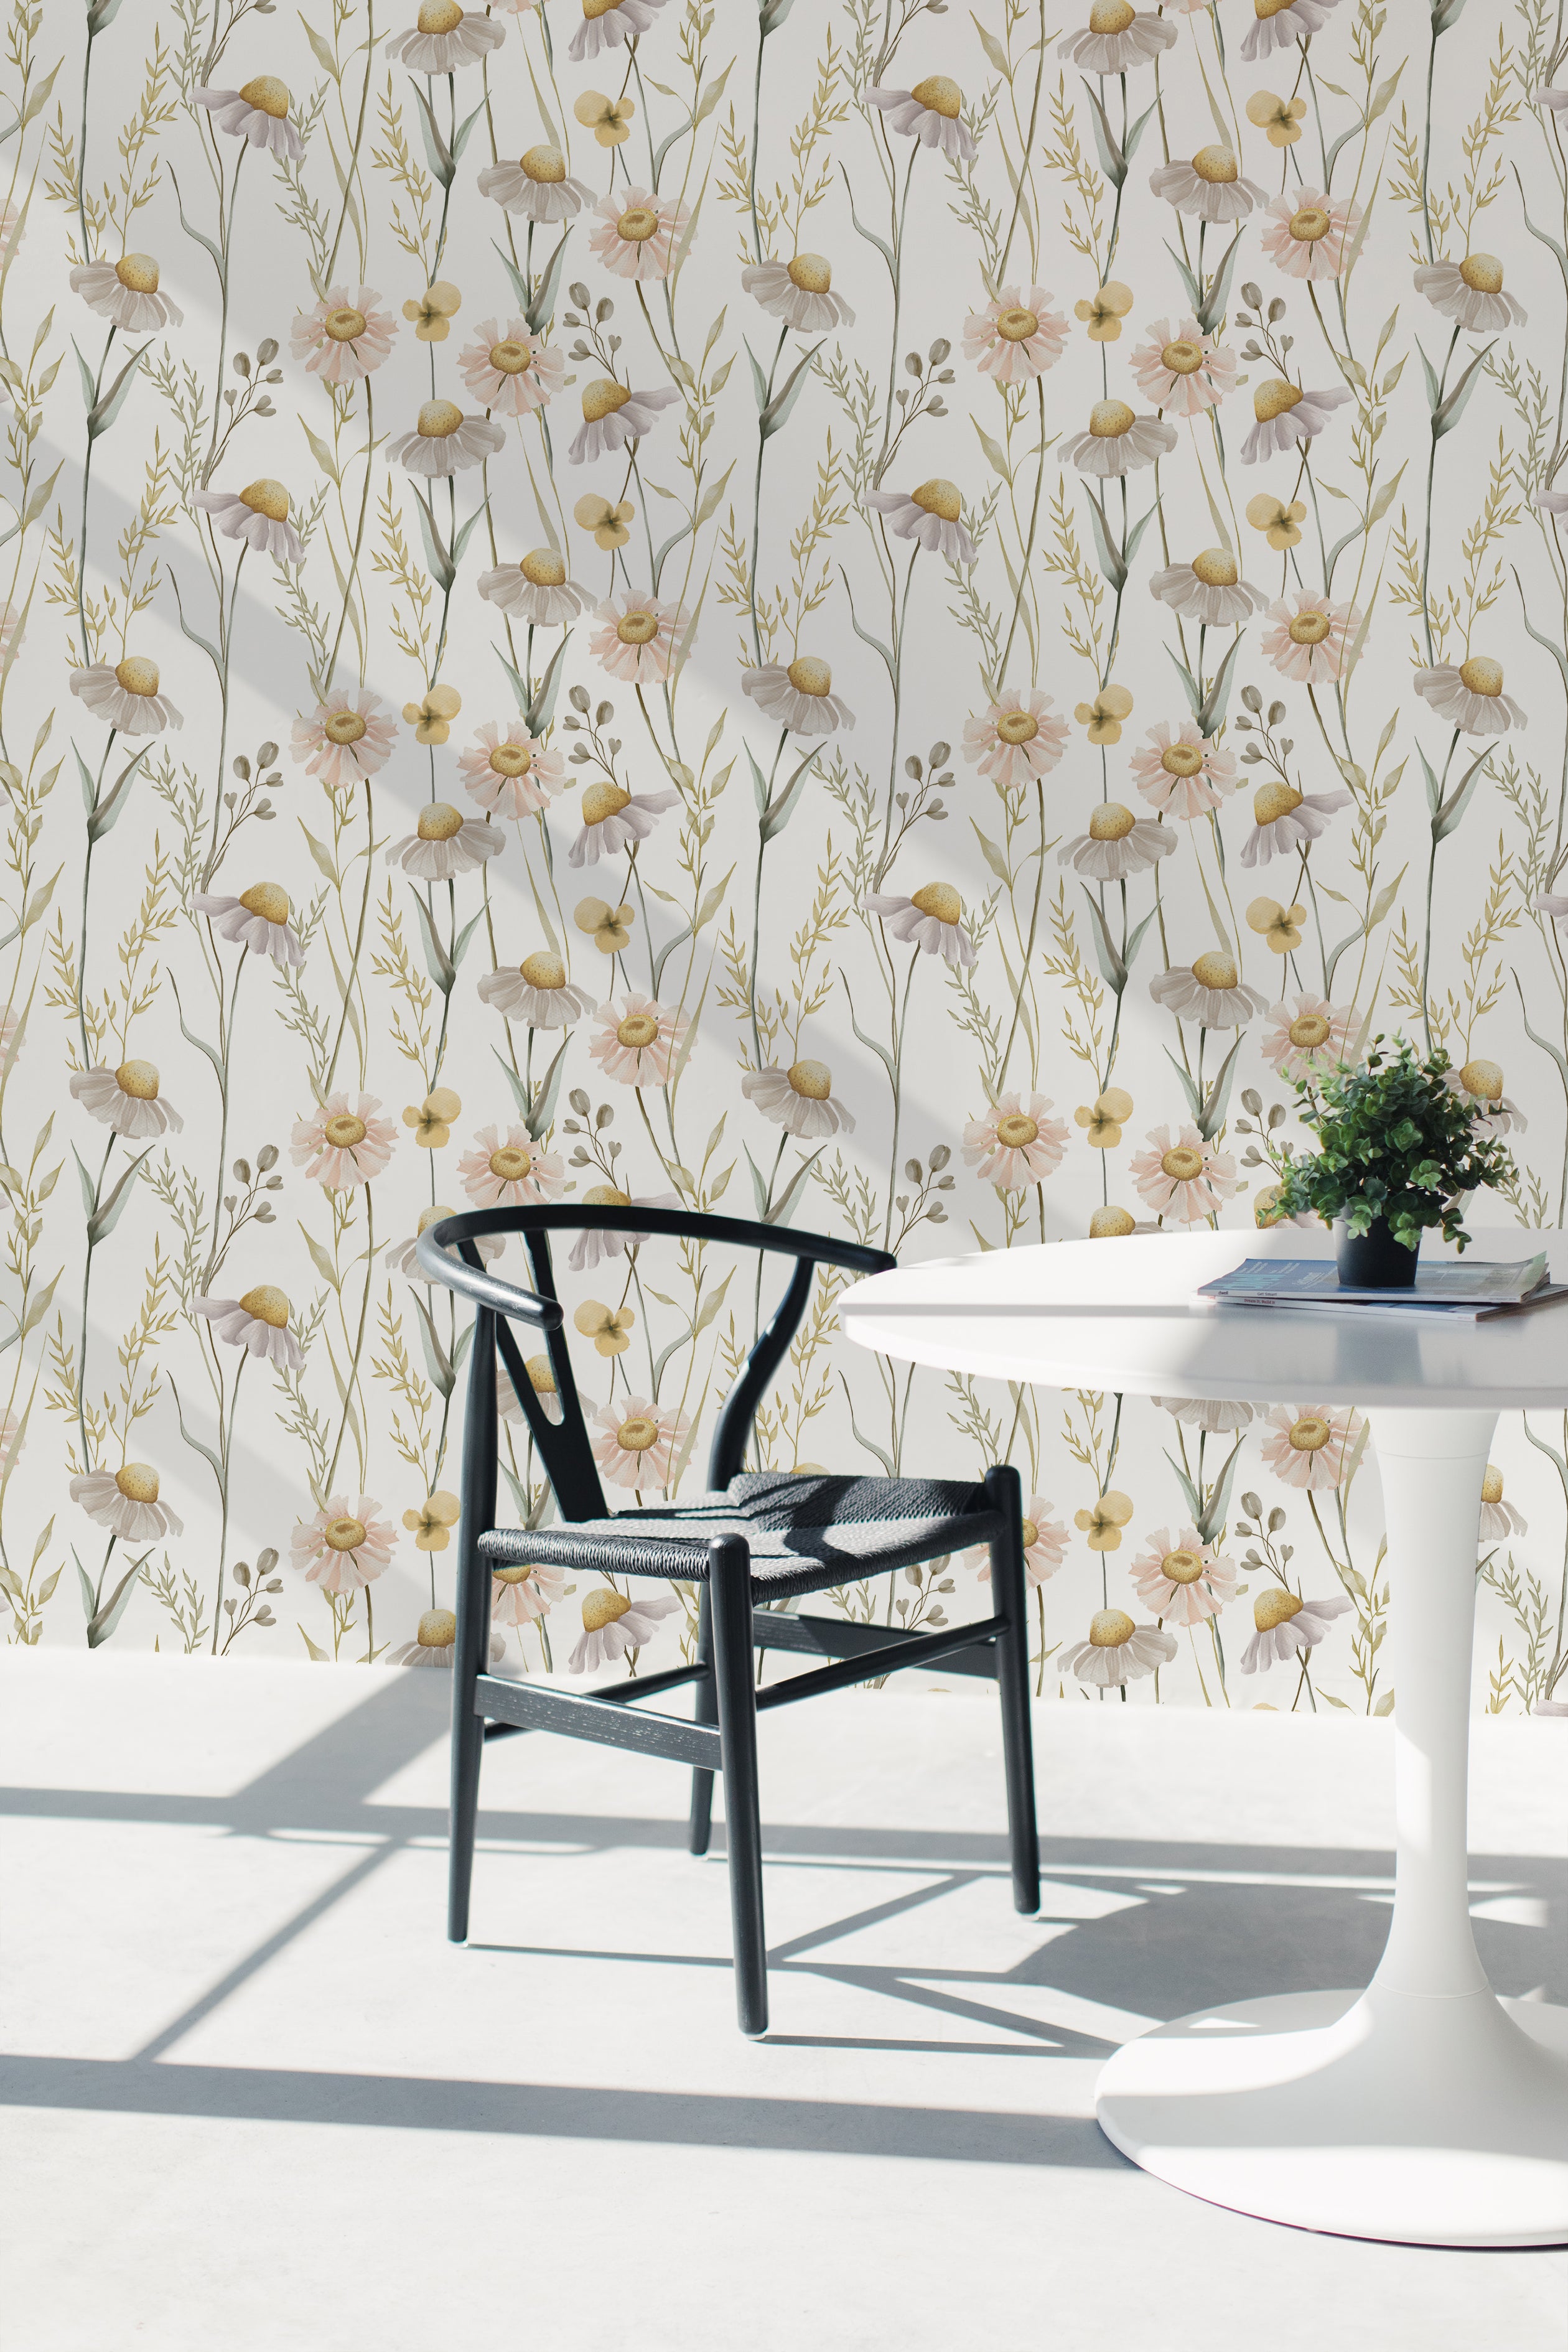 Modern dining room interior featuring Chamomile Wallpaper, which adds a fresh and natural touch with its detailed chamomile flower pattern in soft pastel colors. A black chair and white round table complement the serene and inviting atmosphere.